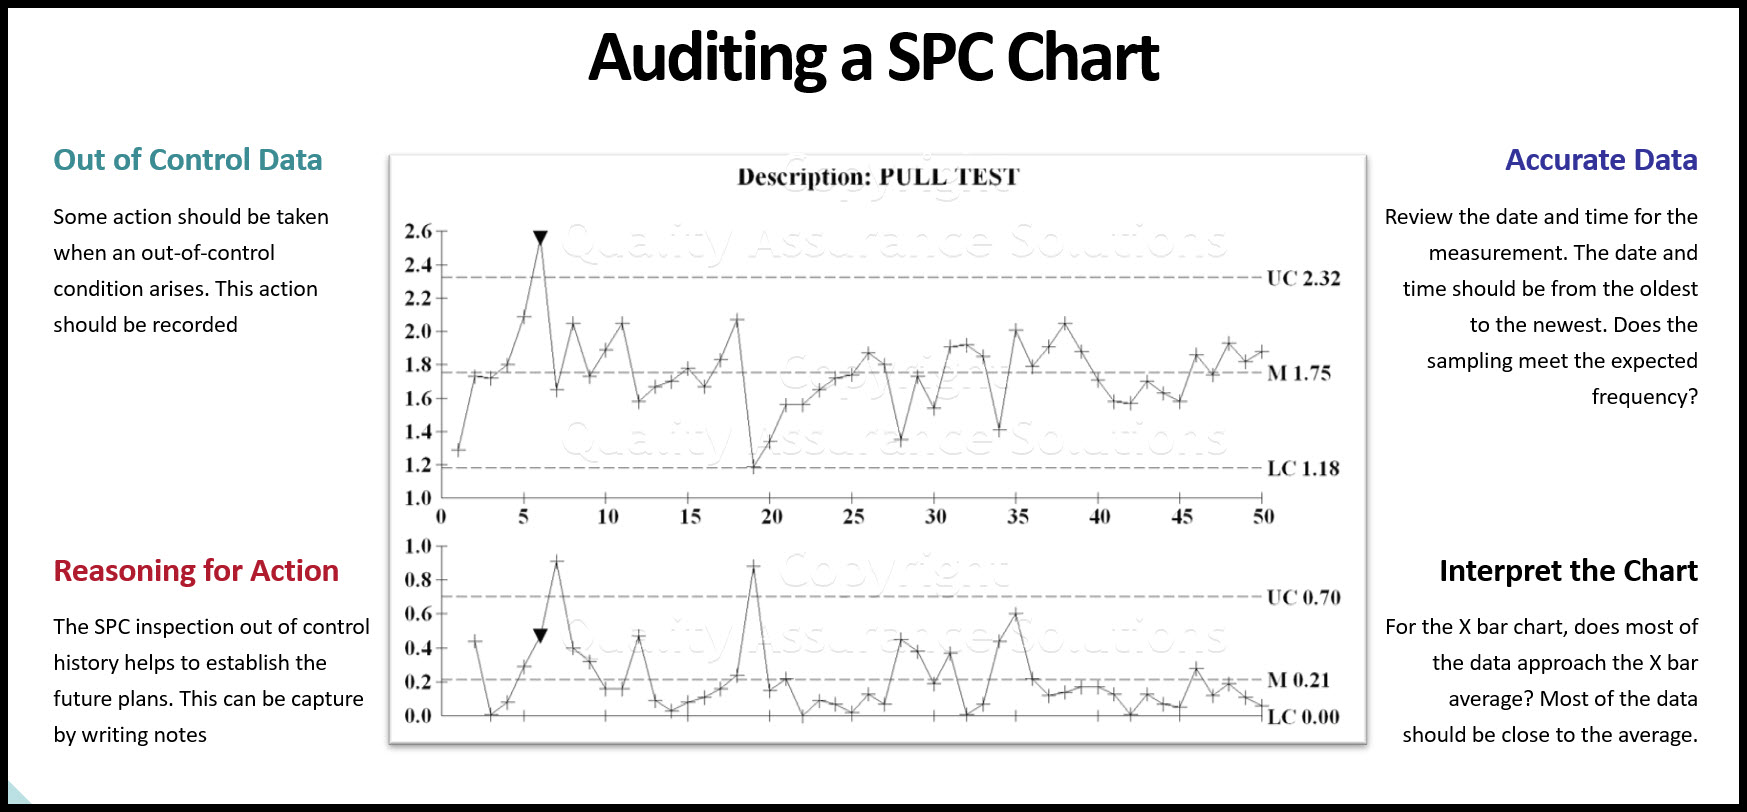 Learn to audit your SPC inspection program. This article covers SPC technology keys such as documentation, training, reviewing, and process improvement. 